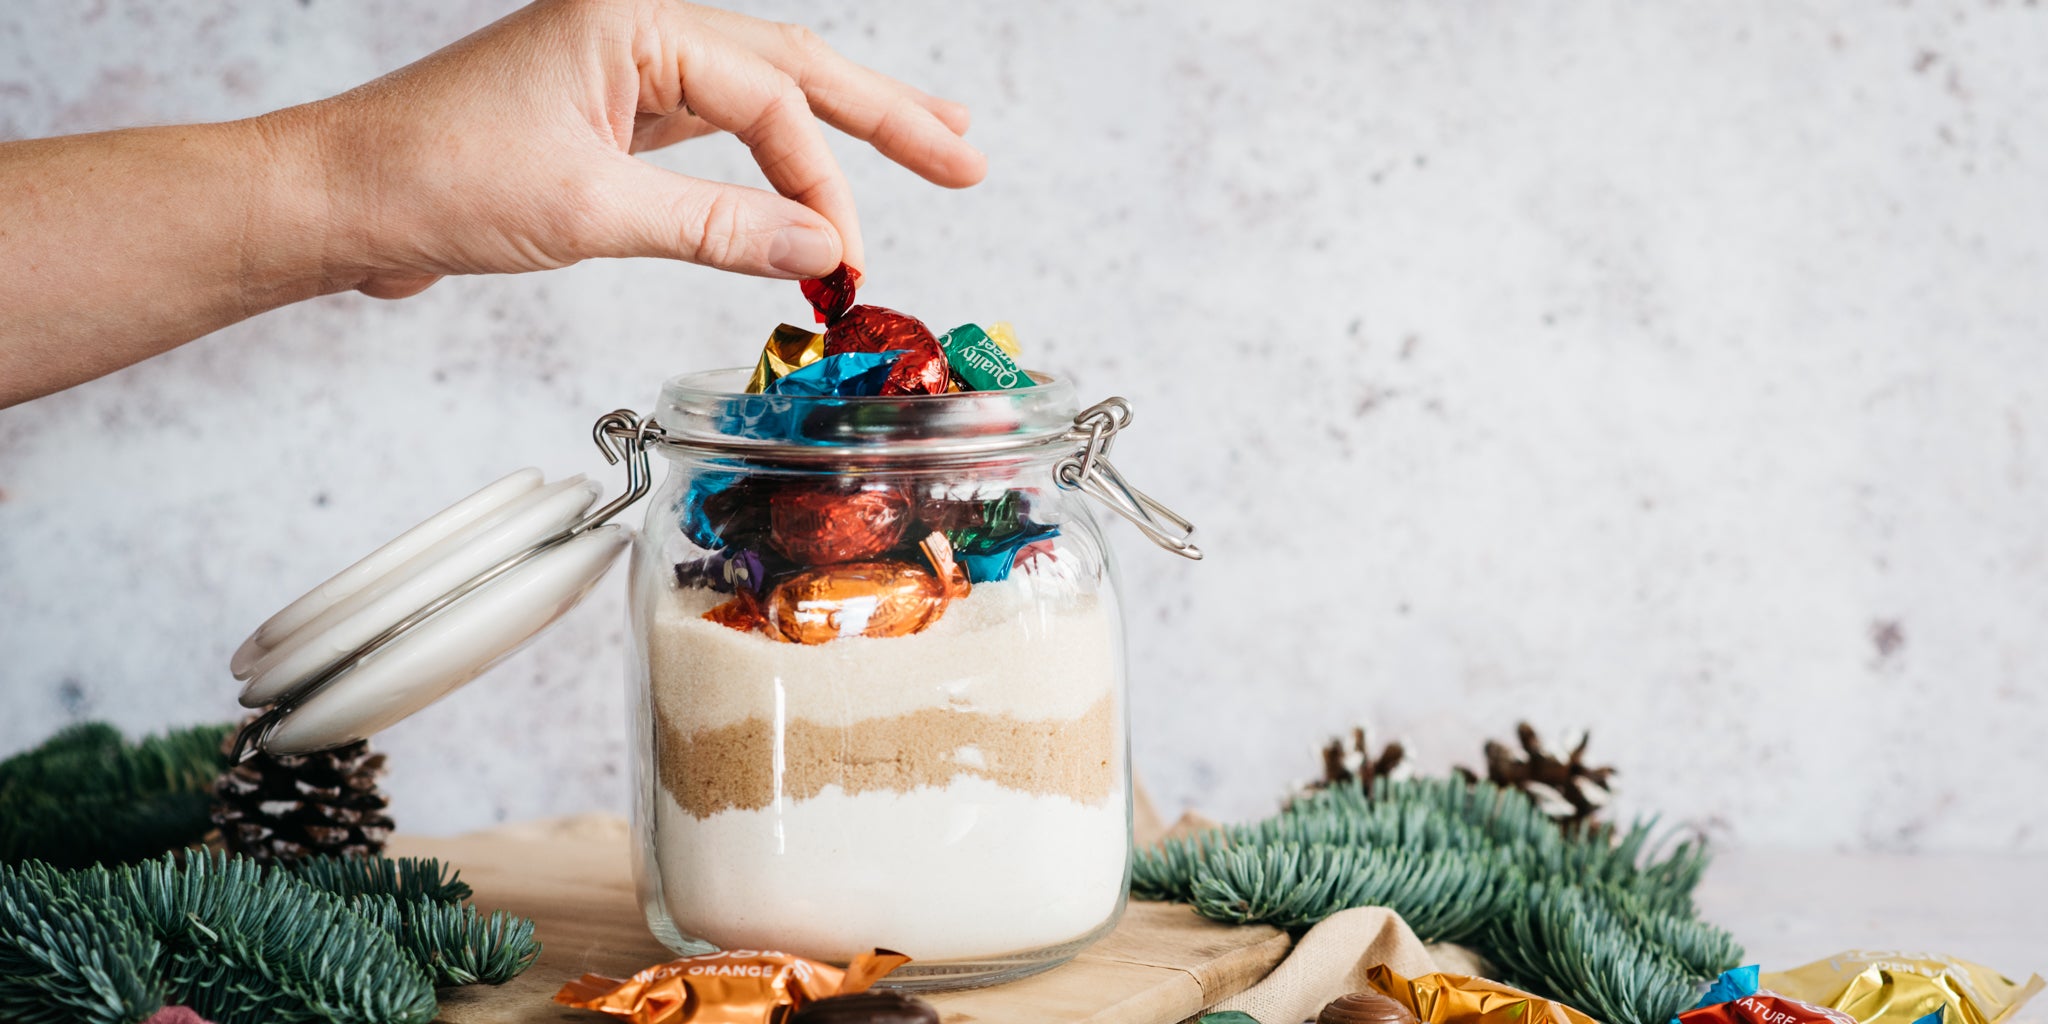 Christmas Cookies in a Jar with a hand reaching to pick a quality street out of the top of the jar 